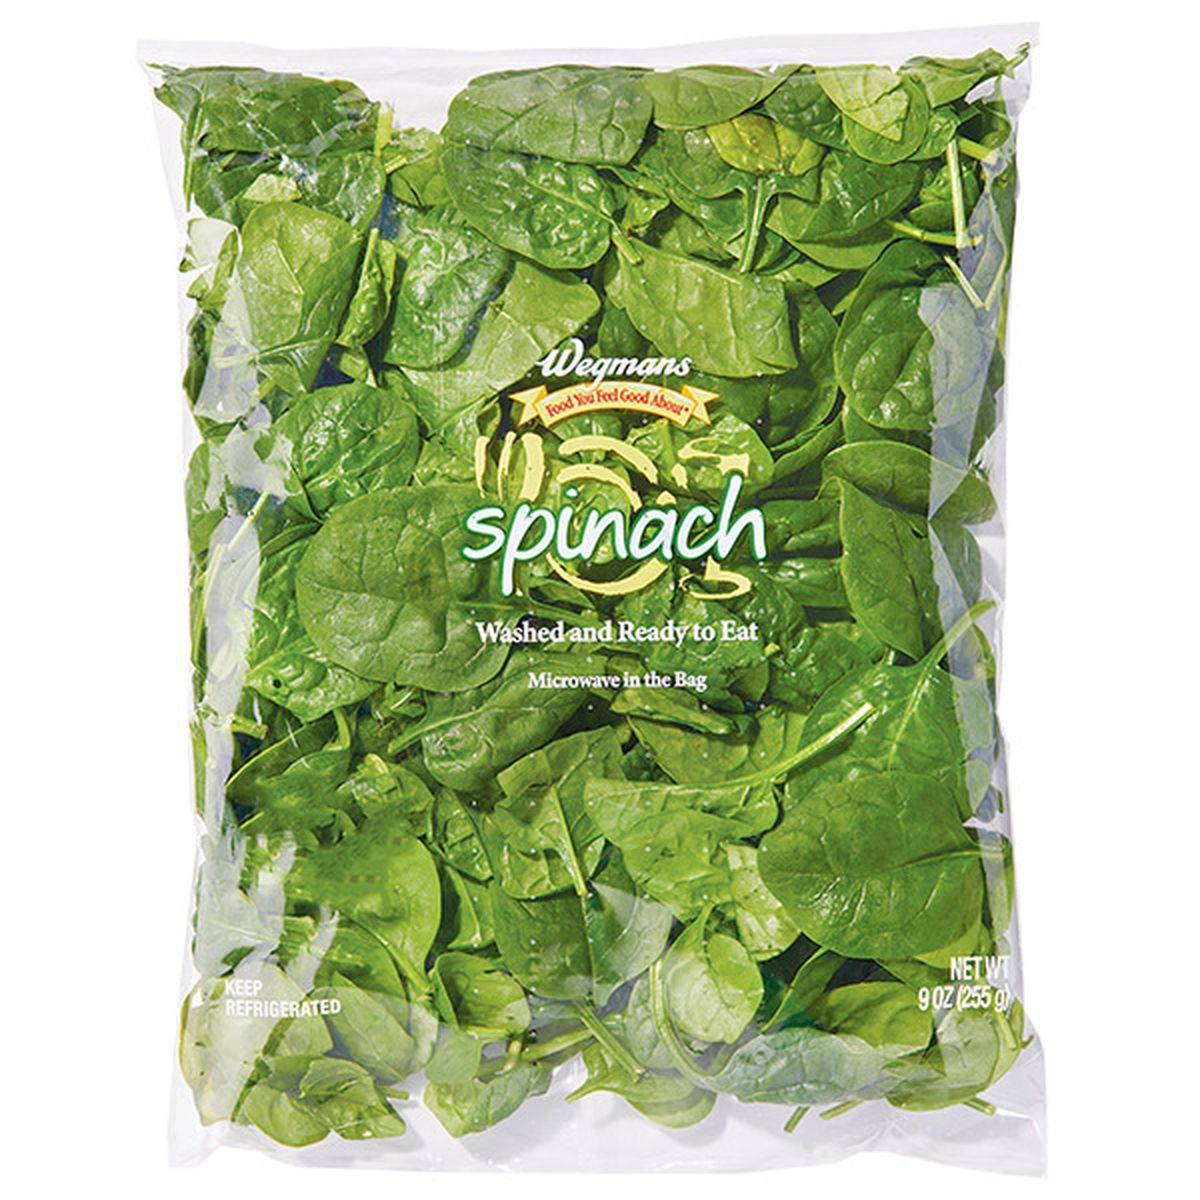 Calories in Wegmans Microwavable Spinach